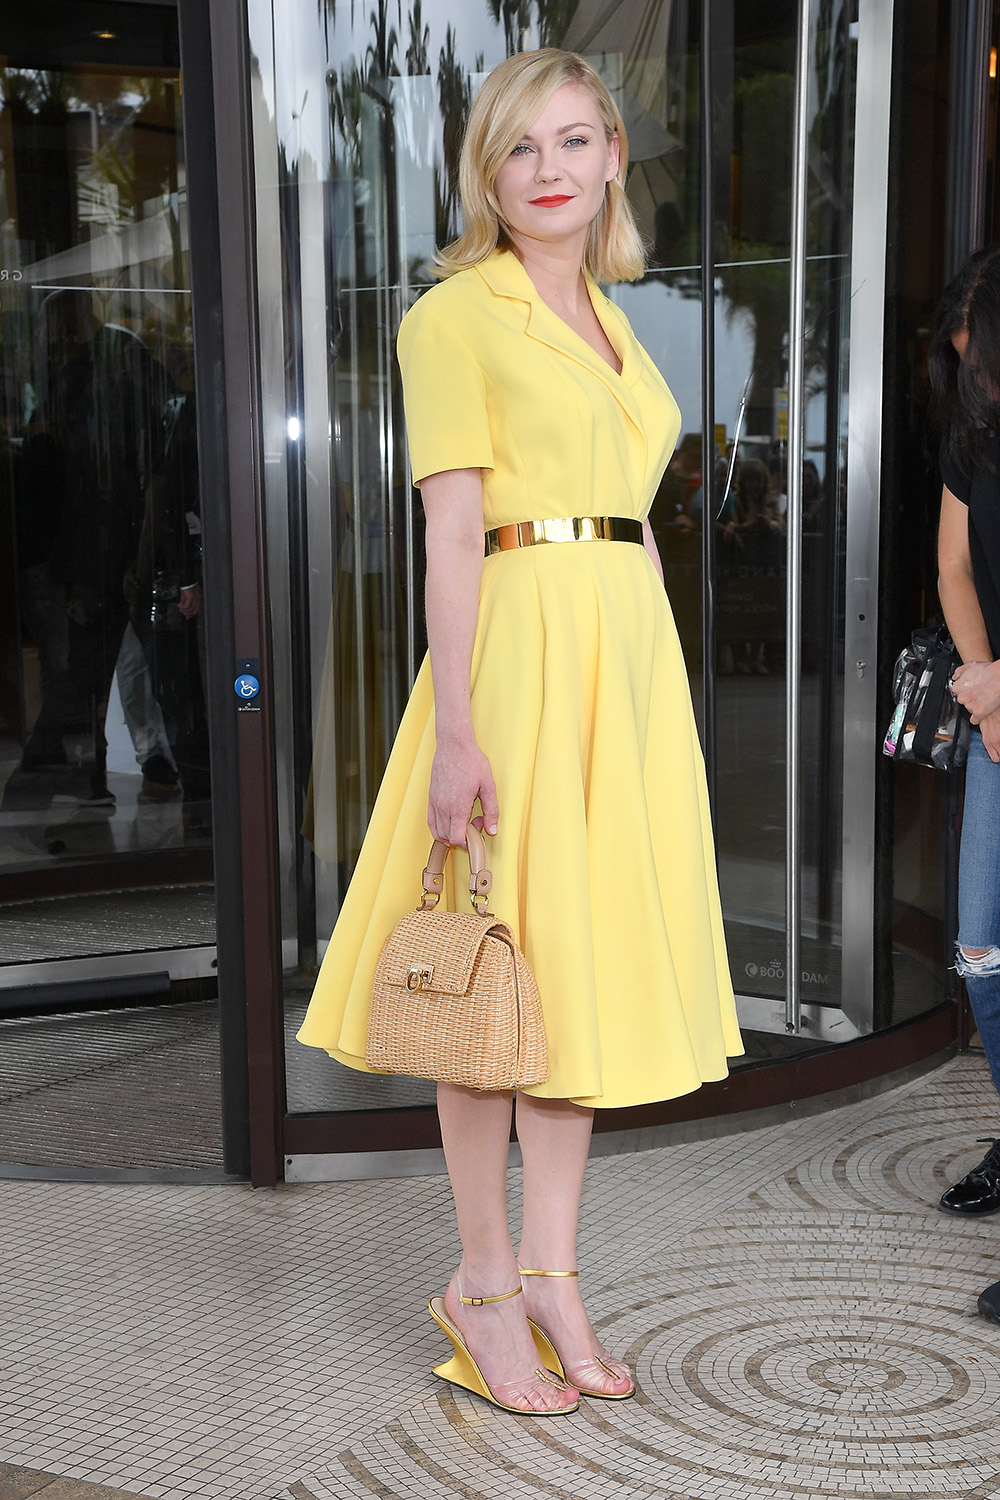 Kirsten Dunst looks impeccable in a yellow Dior dress and wicker basket handbag outside the Hotel Martinez in Cannes.